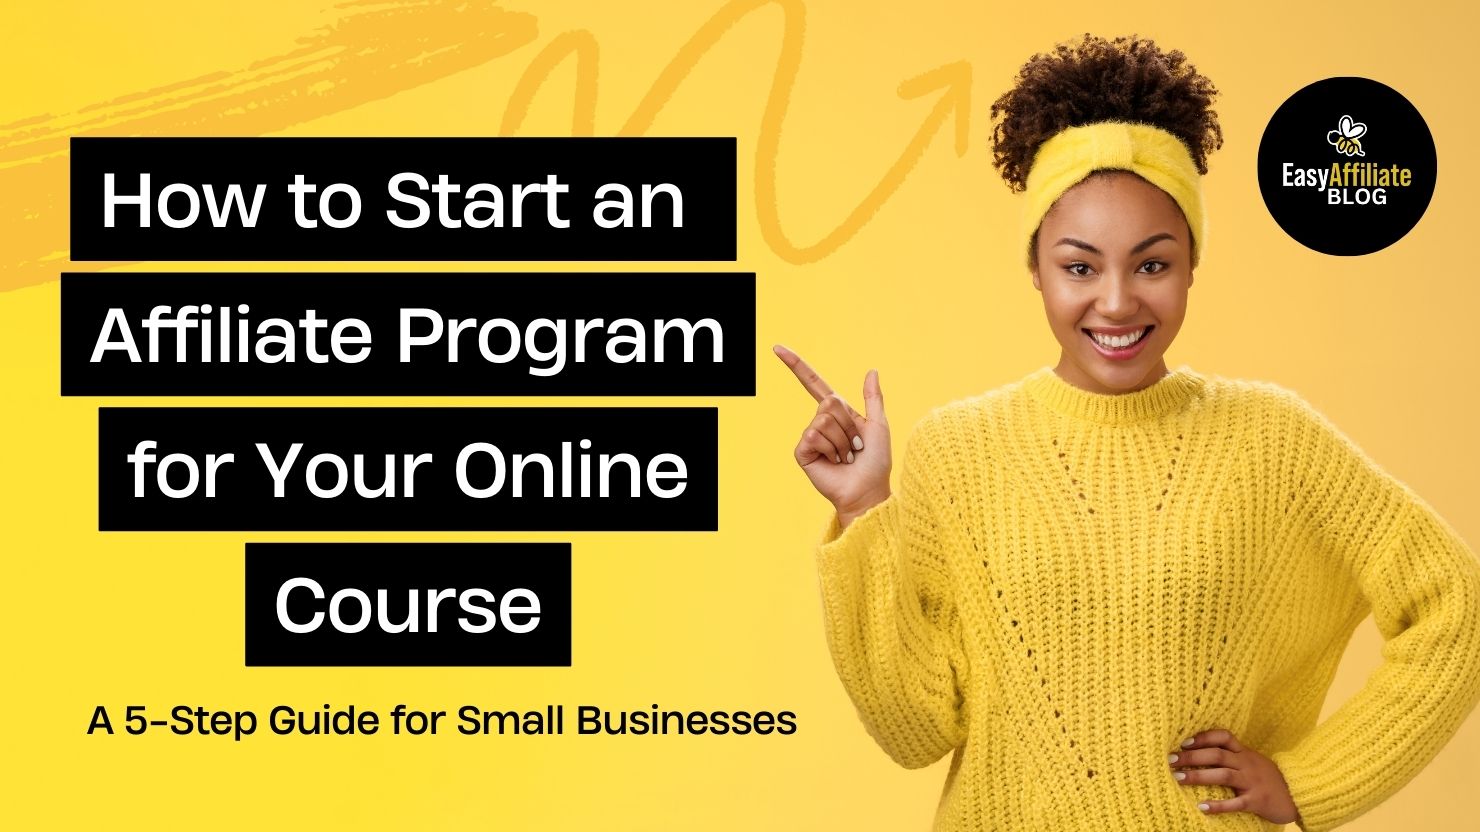 How to Start an Affiliate Program for Your Online Course: A 4-Step Guide for Small Businesses | Easy Affiliate